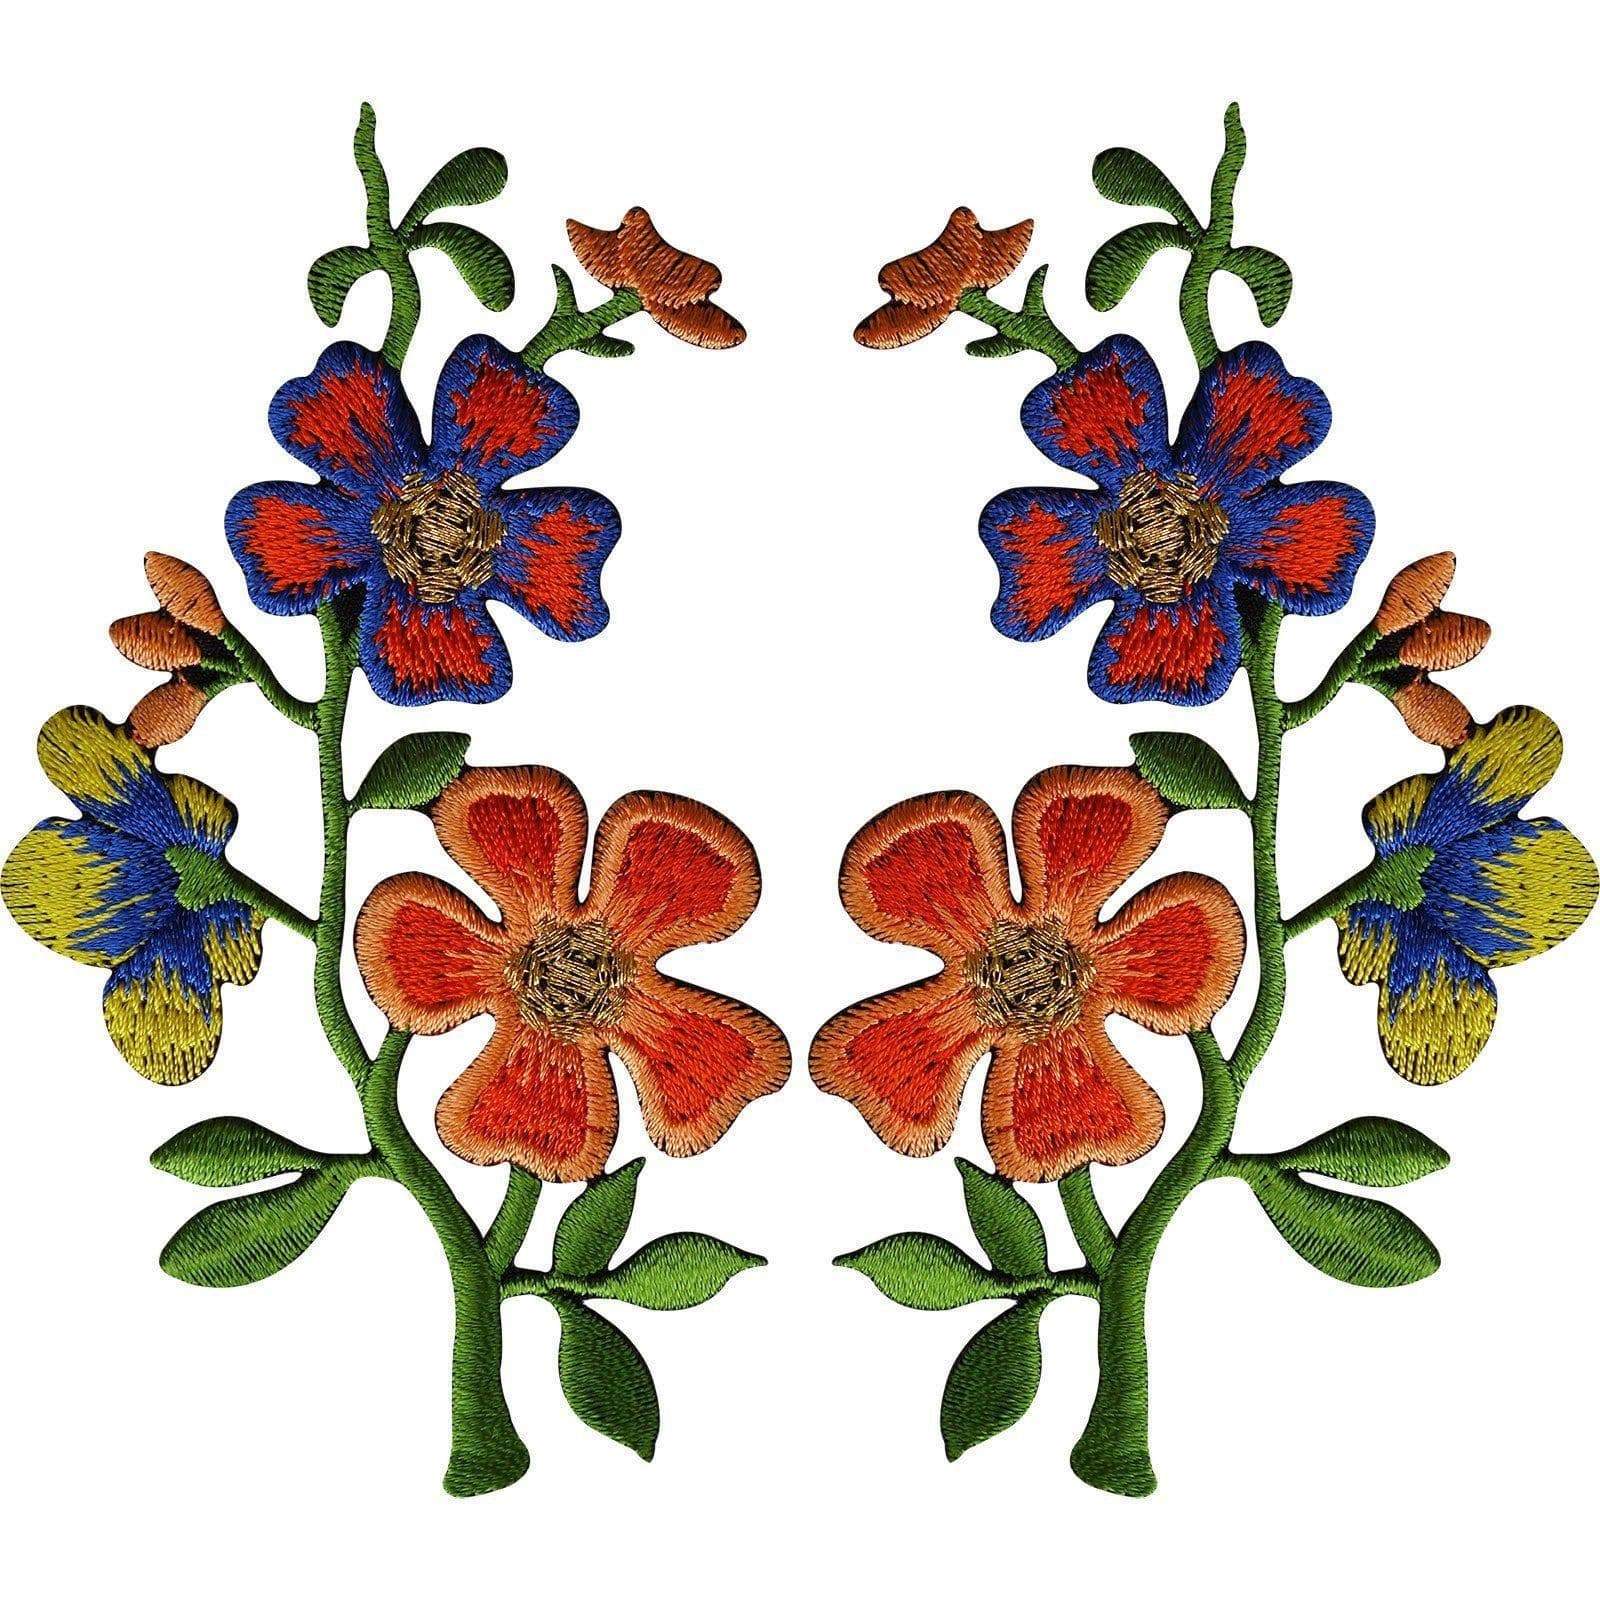 Flower Patches Iron-on Embroidered Motifs Canal Boat/barge Folk Art Yellow  Pansy & Red or Pink Rose Floral Embellishments 